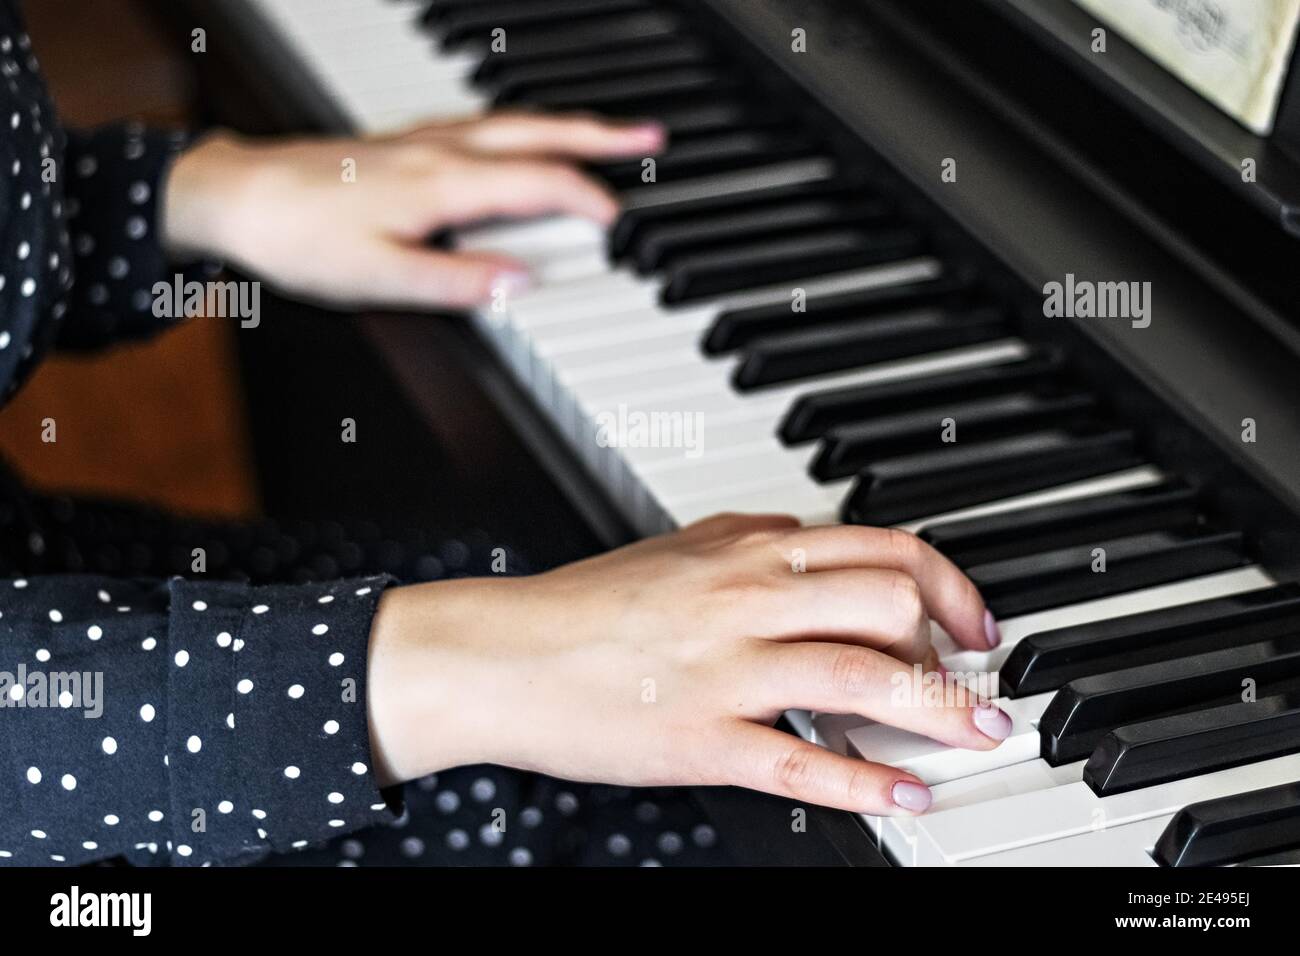 Hands of a young girl pianist on the keys of a synthesizer. Stock Photo